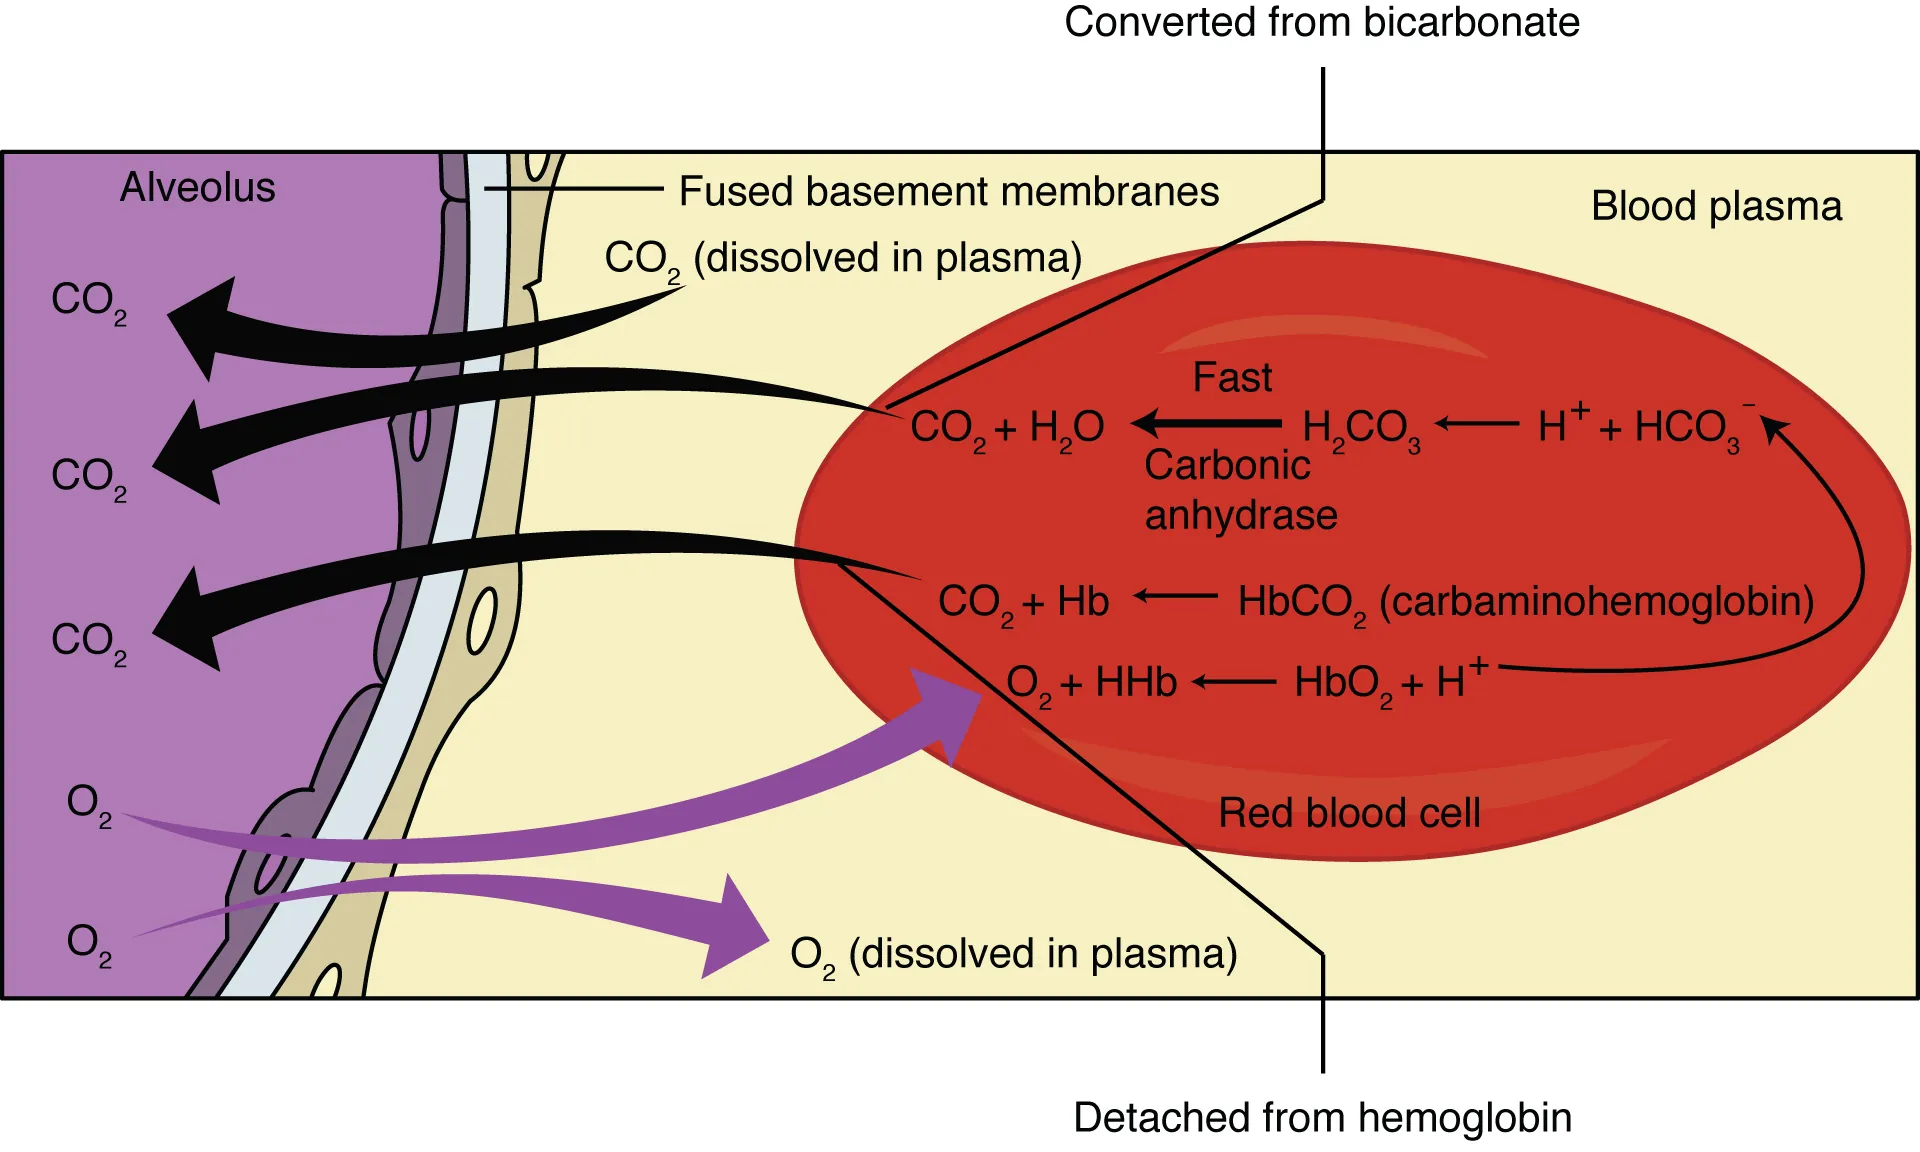 This figure shows the pathway in which external respiration takes place. The exchange of oxygen and carbon dioxide between the alveolus and blood plasma is detailed.